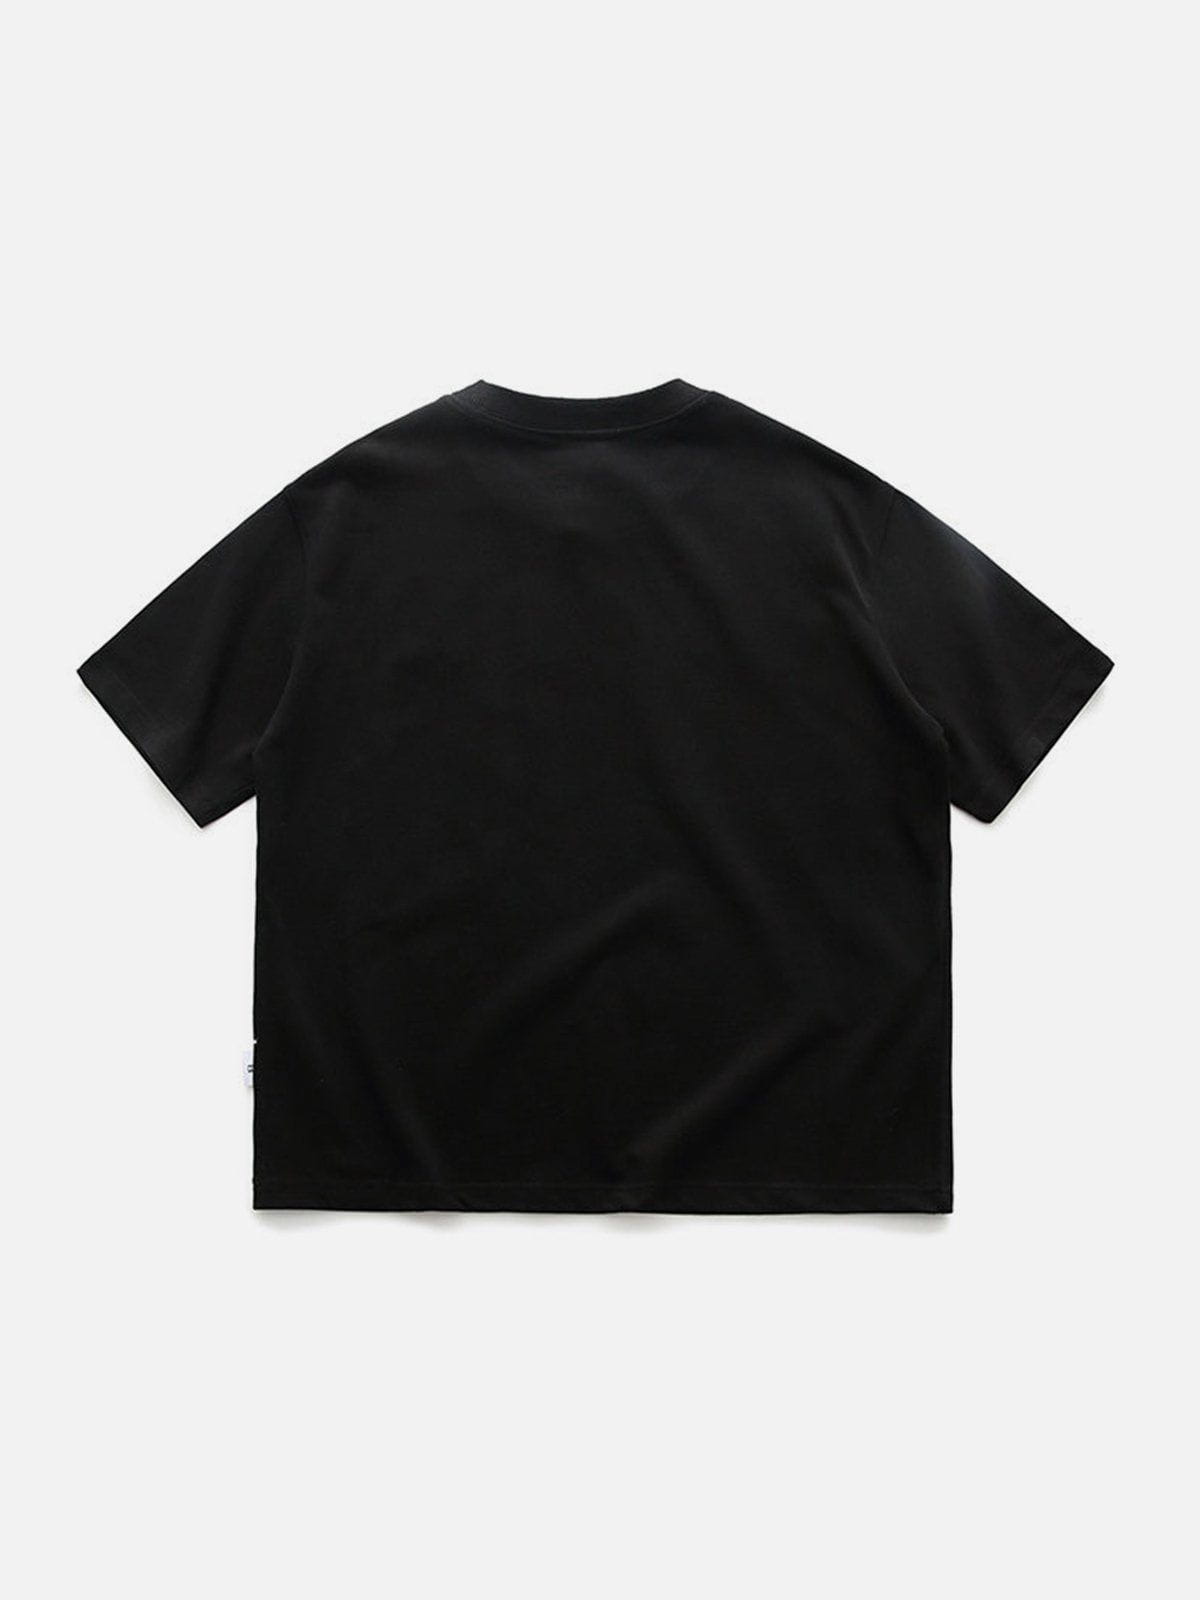 Sneakerland™ - Solid Embroidery Semicircle Letter Tee